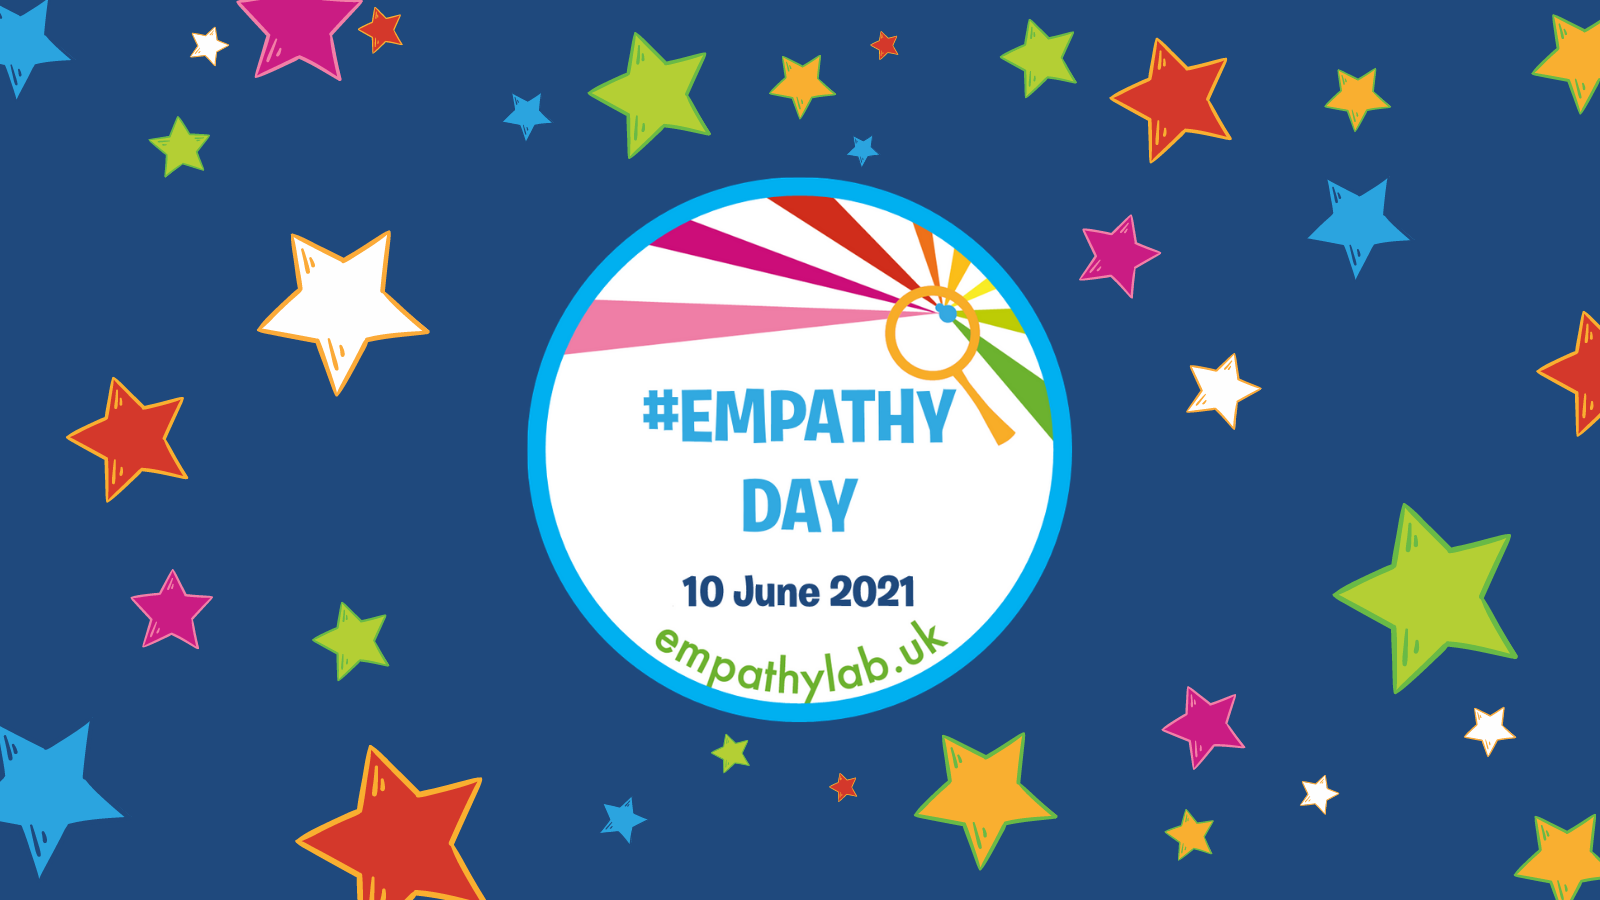 An image of the Empathy Day logo on a dark blue background with multicoloured stars